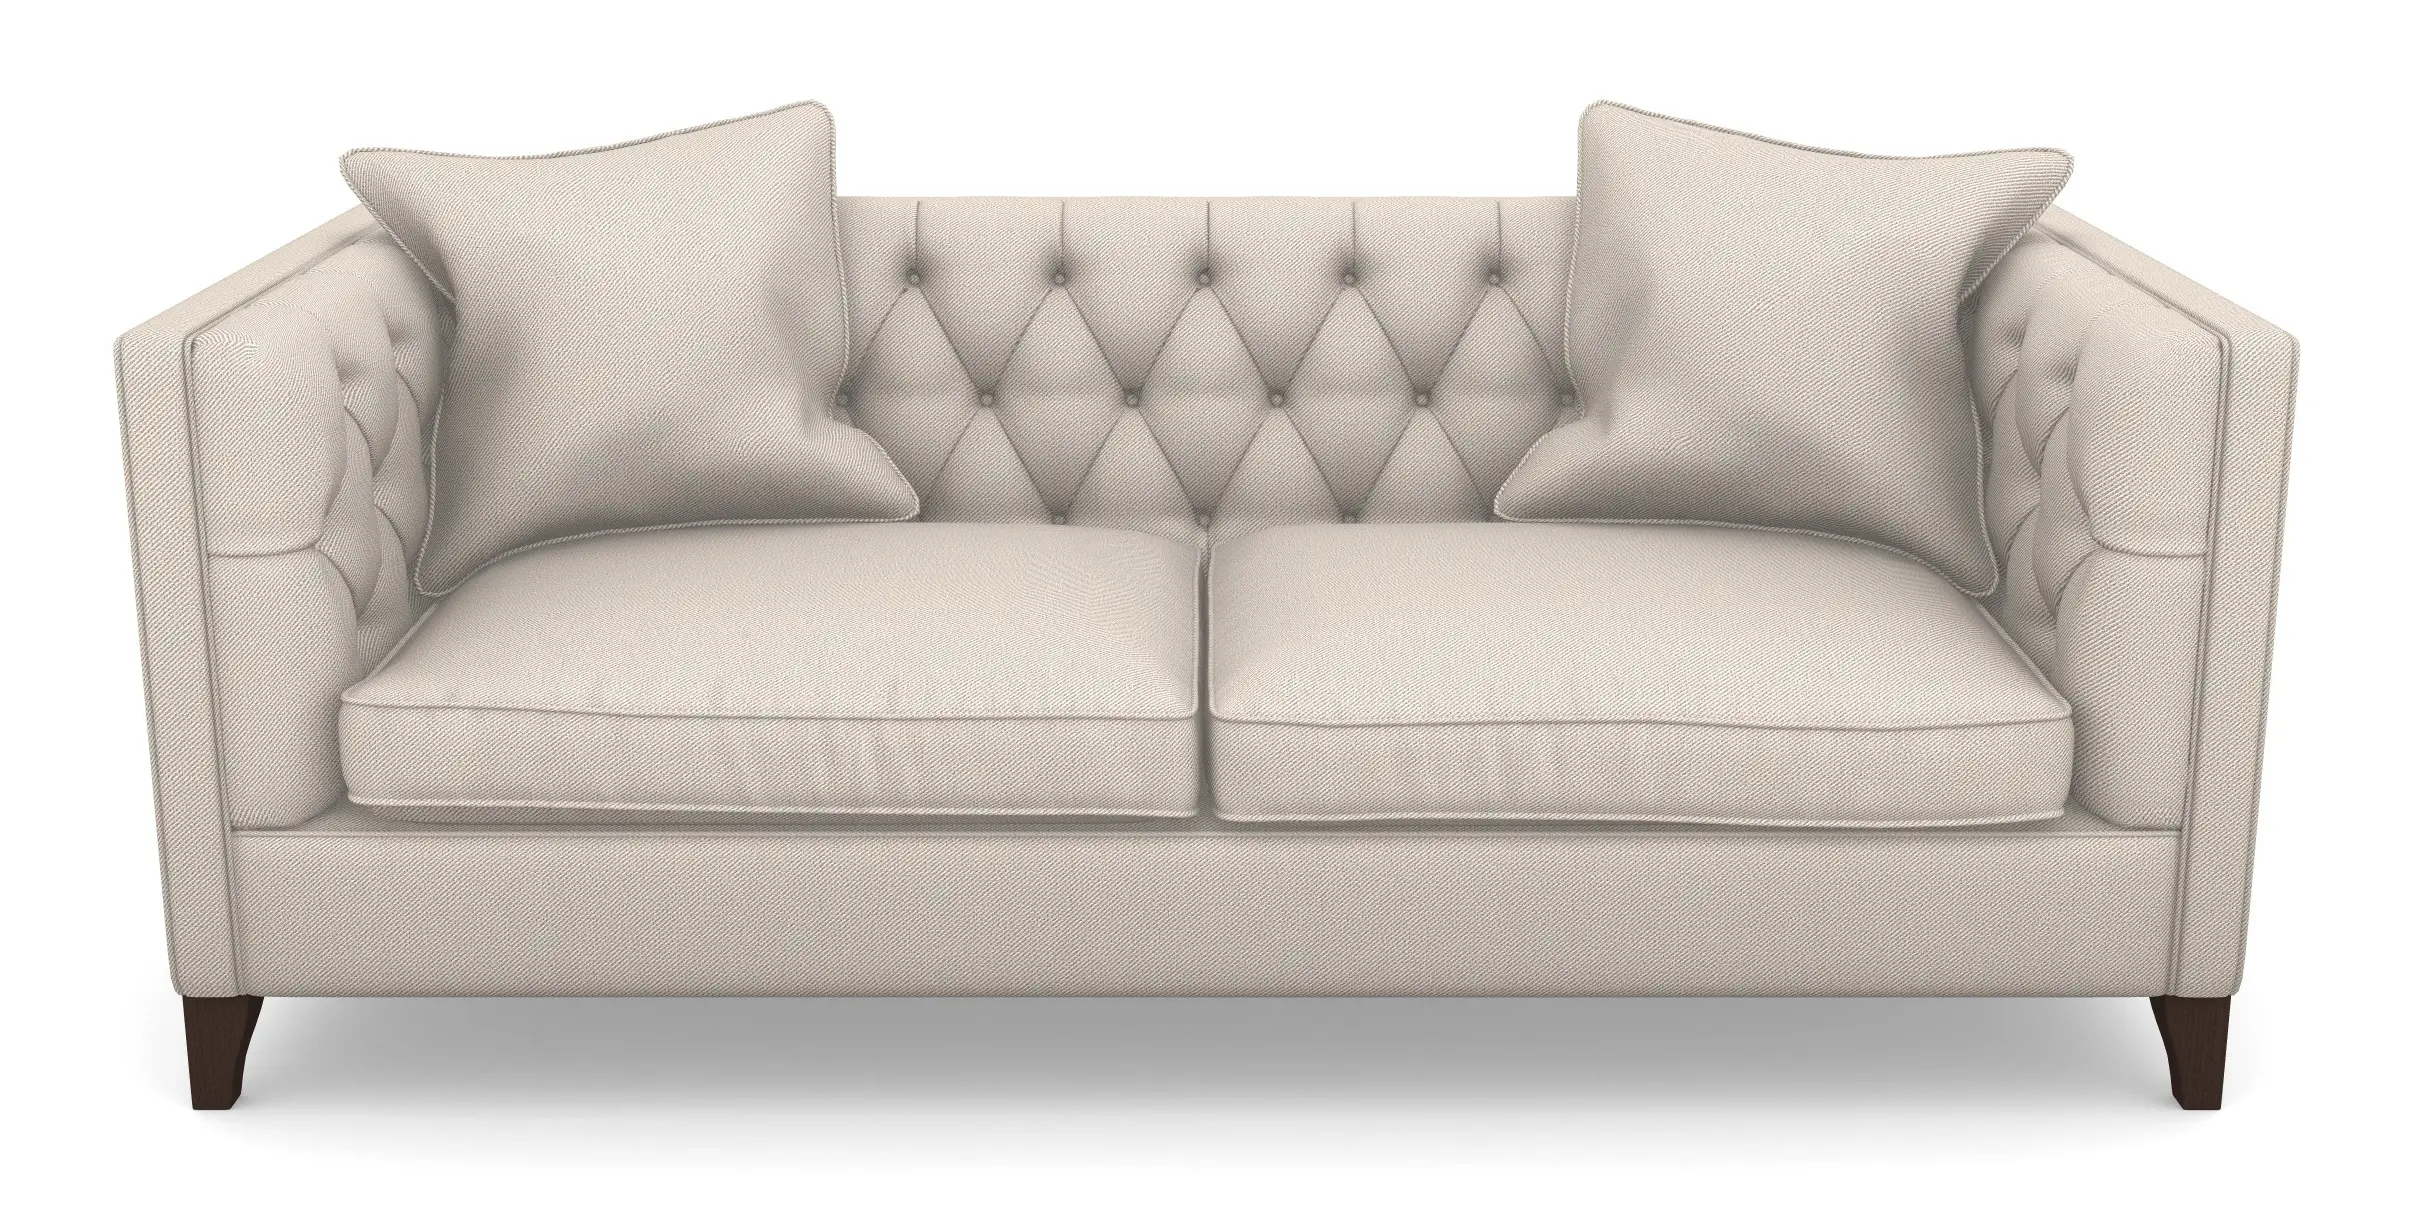 Haresfield Chesterfield Sofa Collection